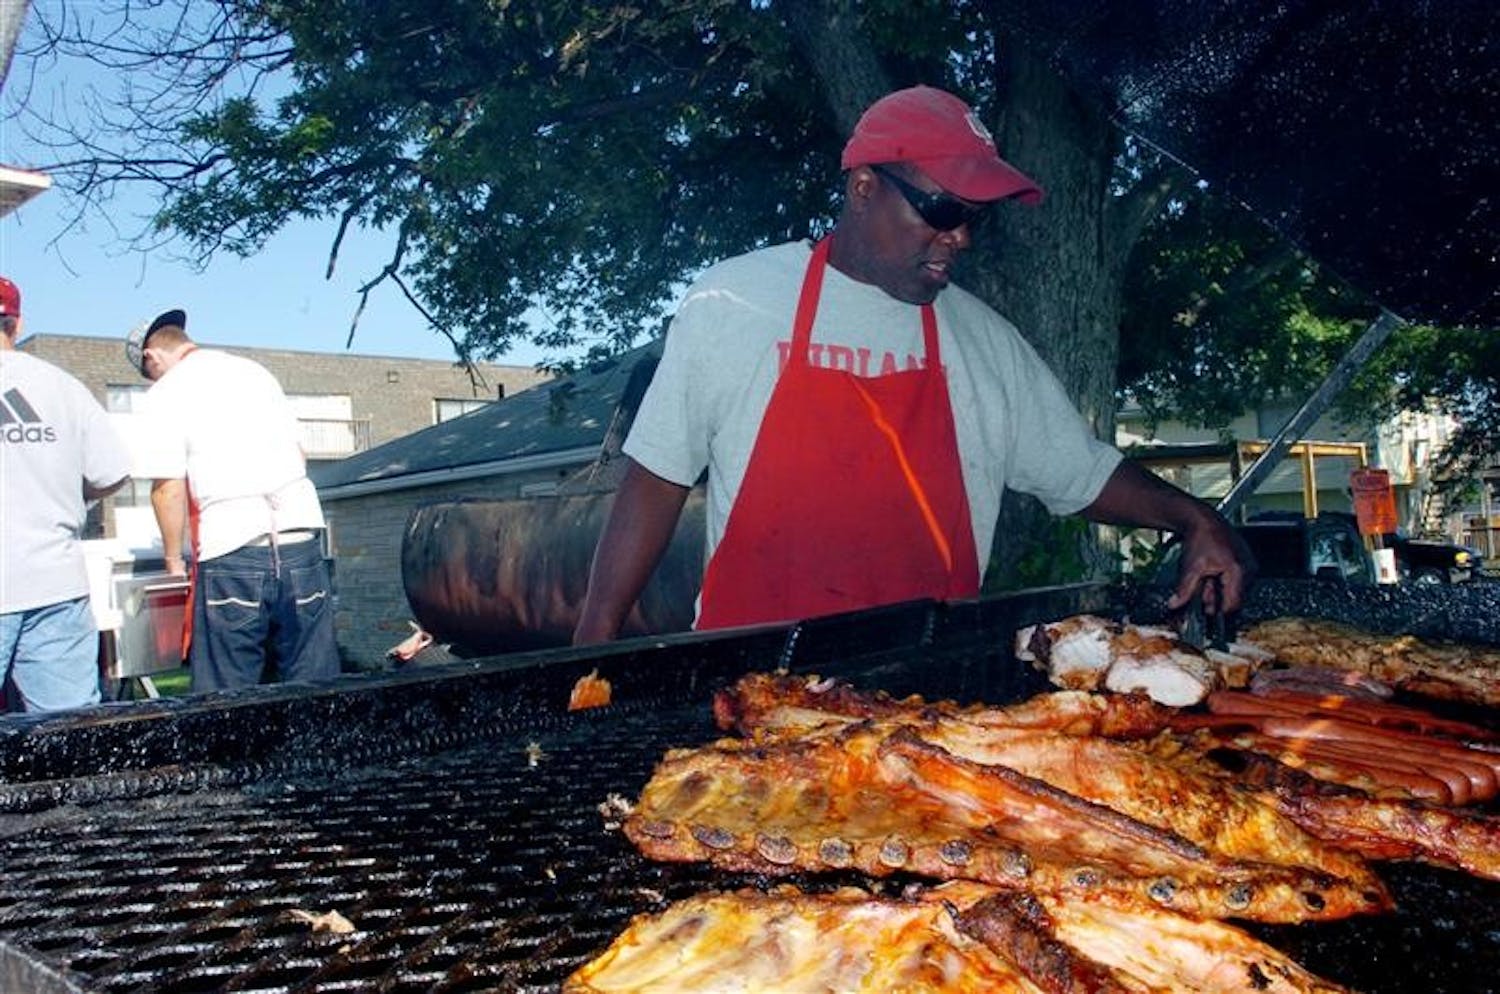 Will Thomas turns some meat on his grill prior to a football game between IU and Western Kentucky on Aug. 30 near Memorial Stadium.